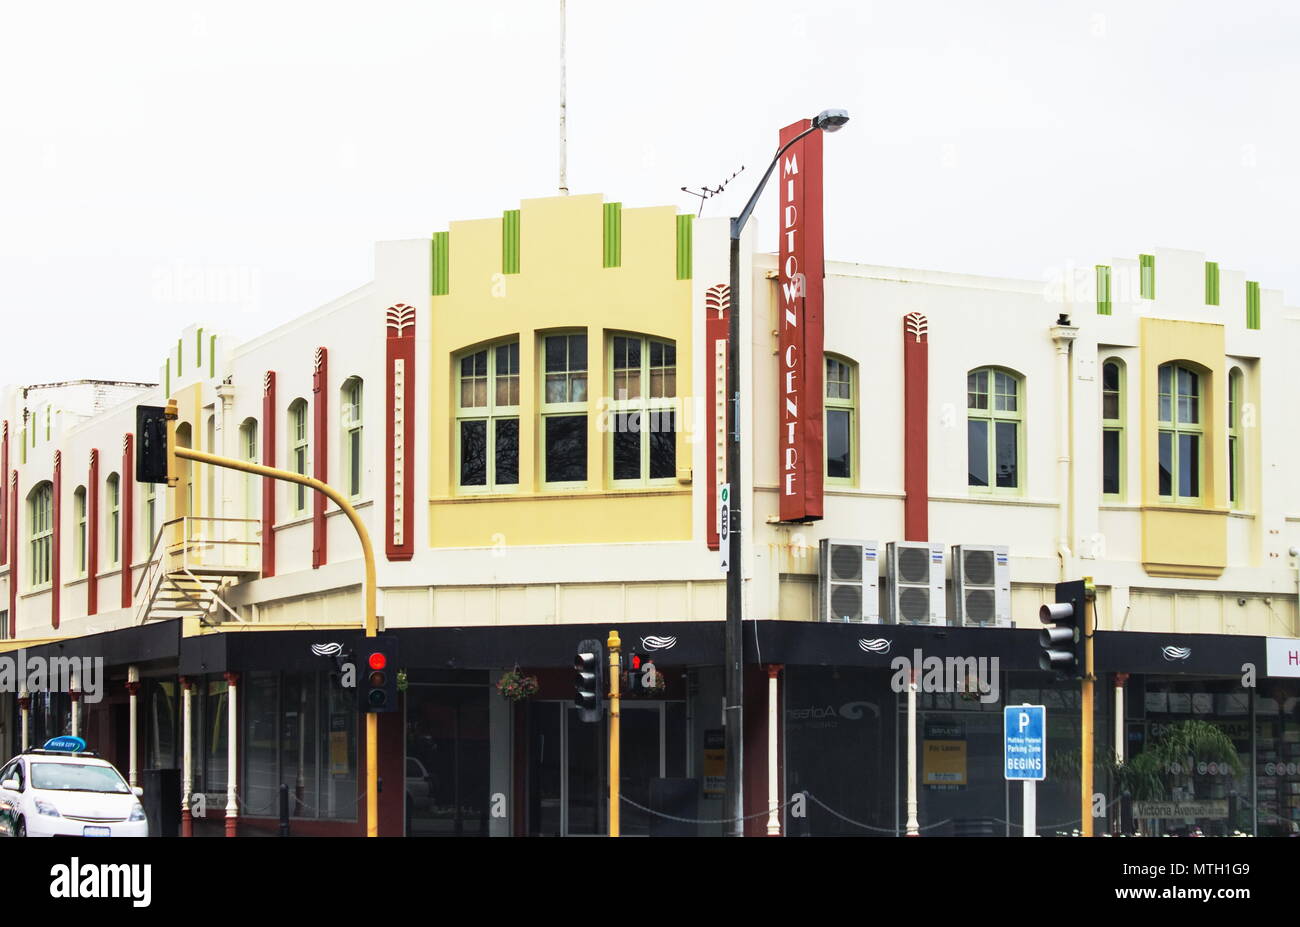 Whanganui, New Zealand - 2 July 2016: Art Deco Architecture of the Midtown Centre Building located on the corner of Victoria Avenue and Guyton Street. Stock Photo